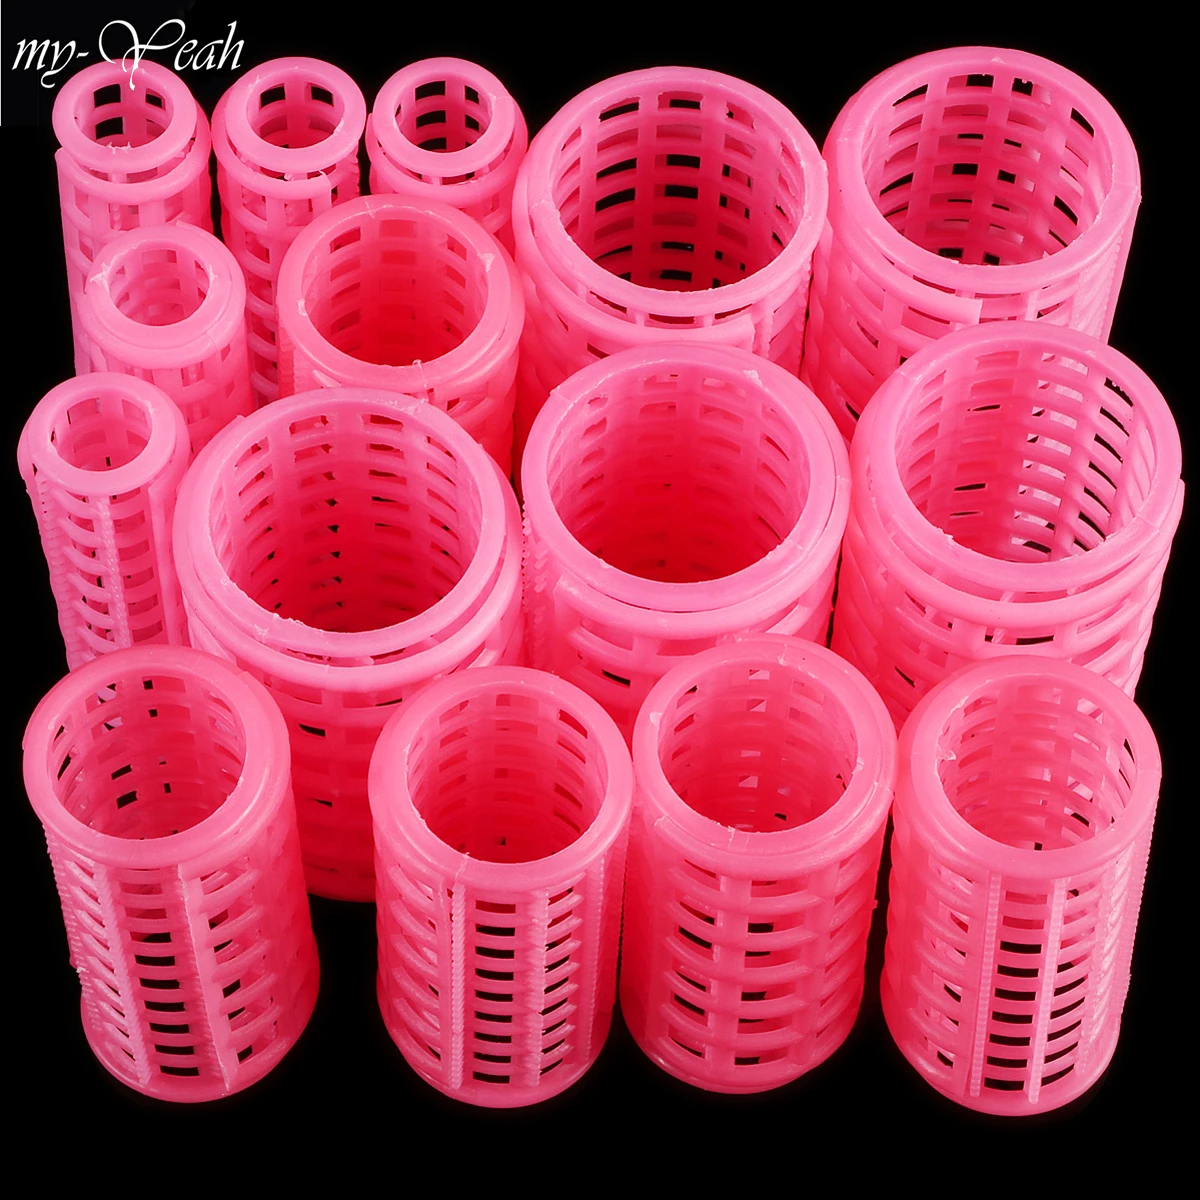 

15pcs/Set Pink Plastic Large Grip Hairdressing Hair Roll Roller Curlers Salon Home Use DIY Curling Curler Rollers Styling Tools